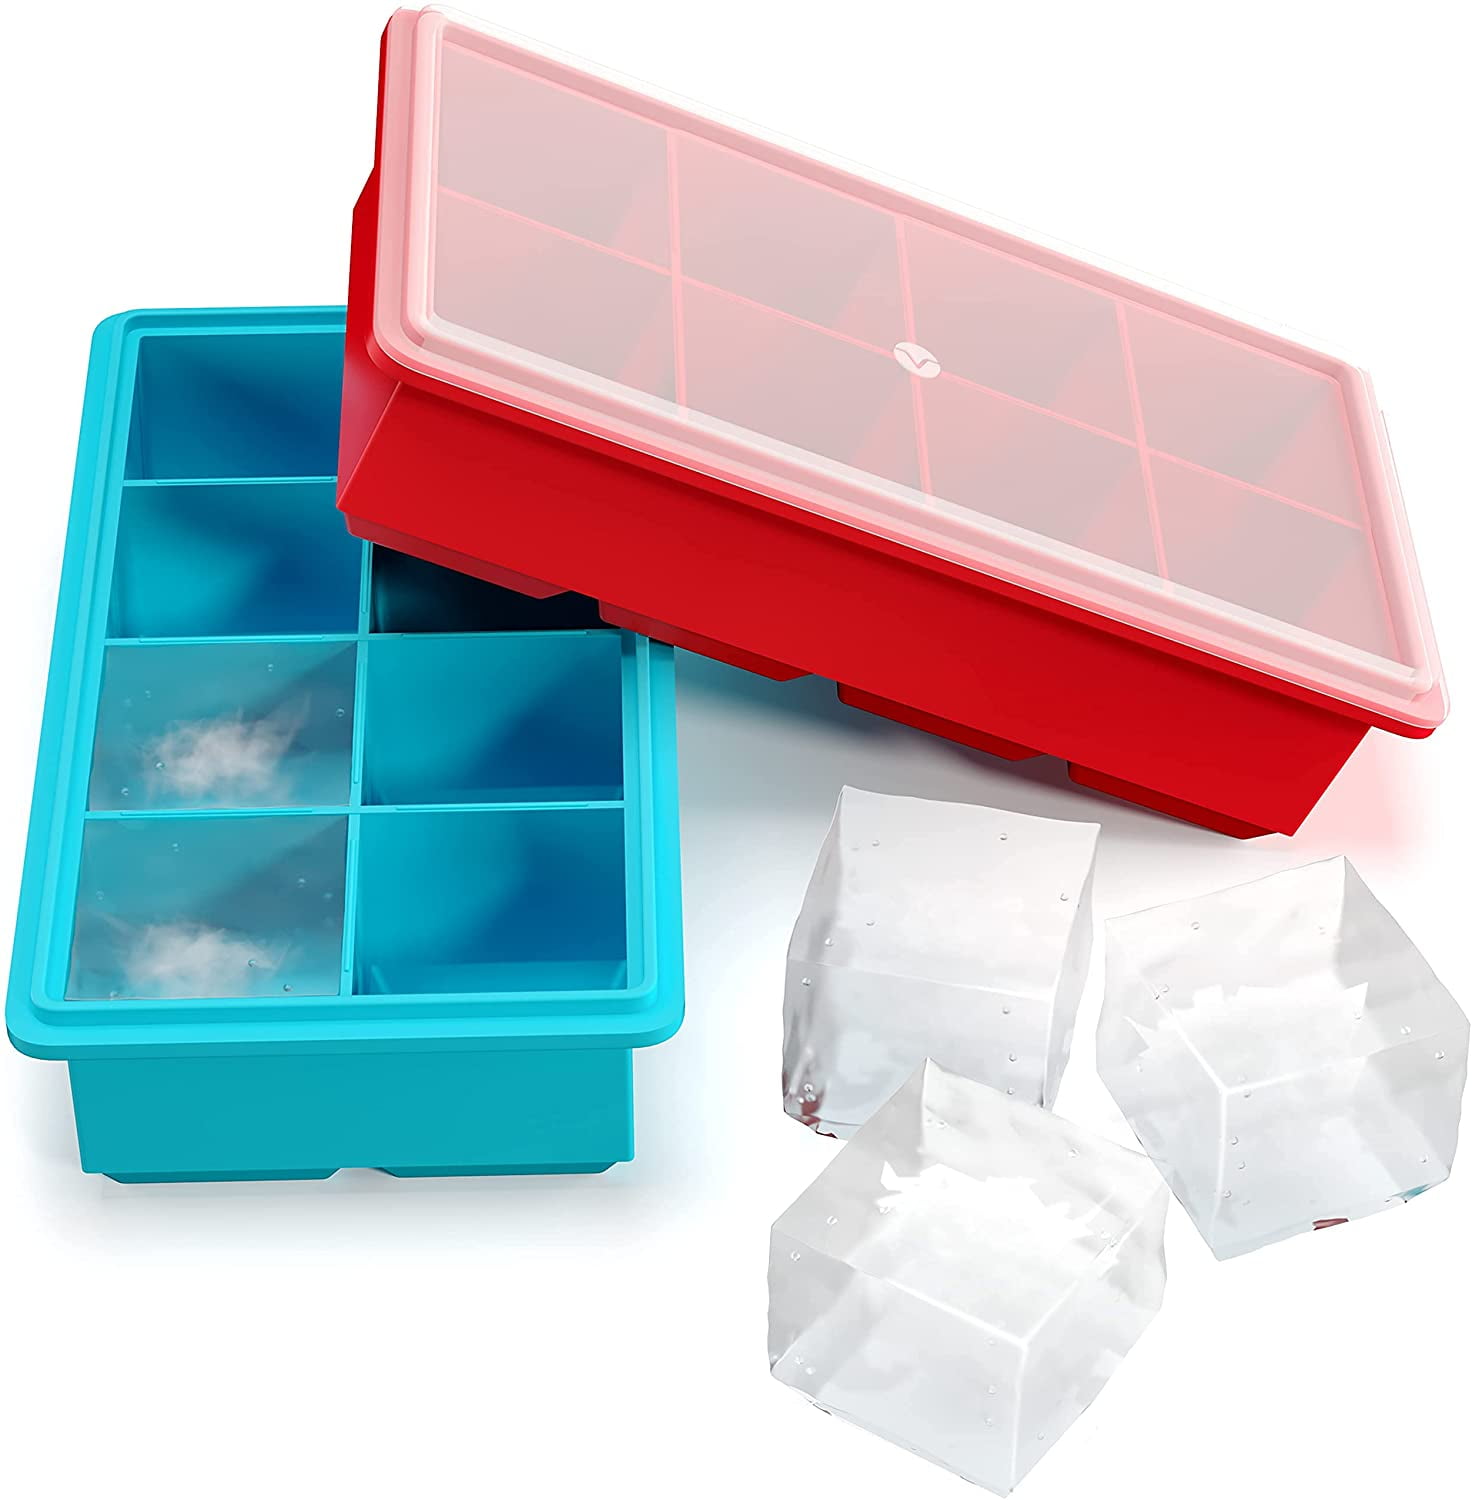 Set of Silicone Ice Cube Trays Makes 8 Large 2 in. x 2 in. Cubes